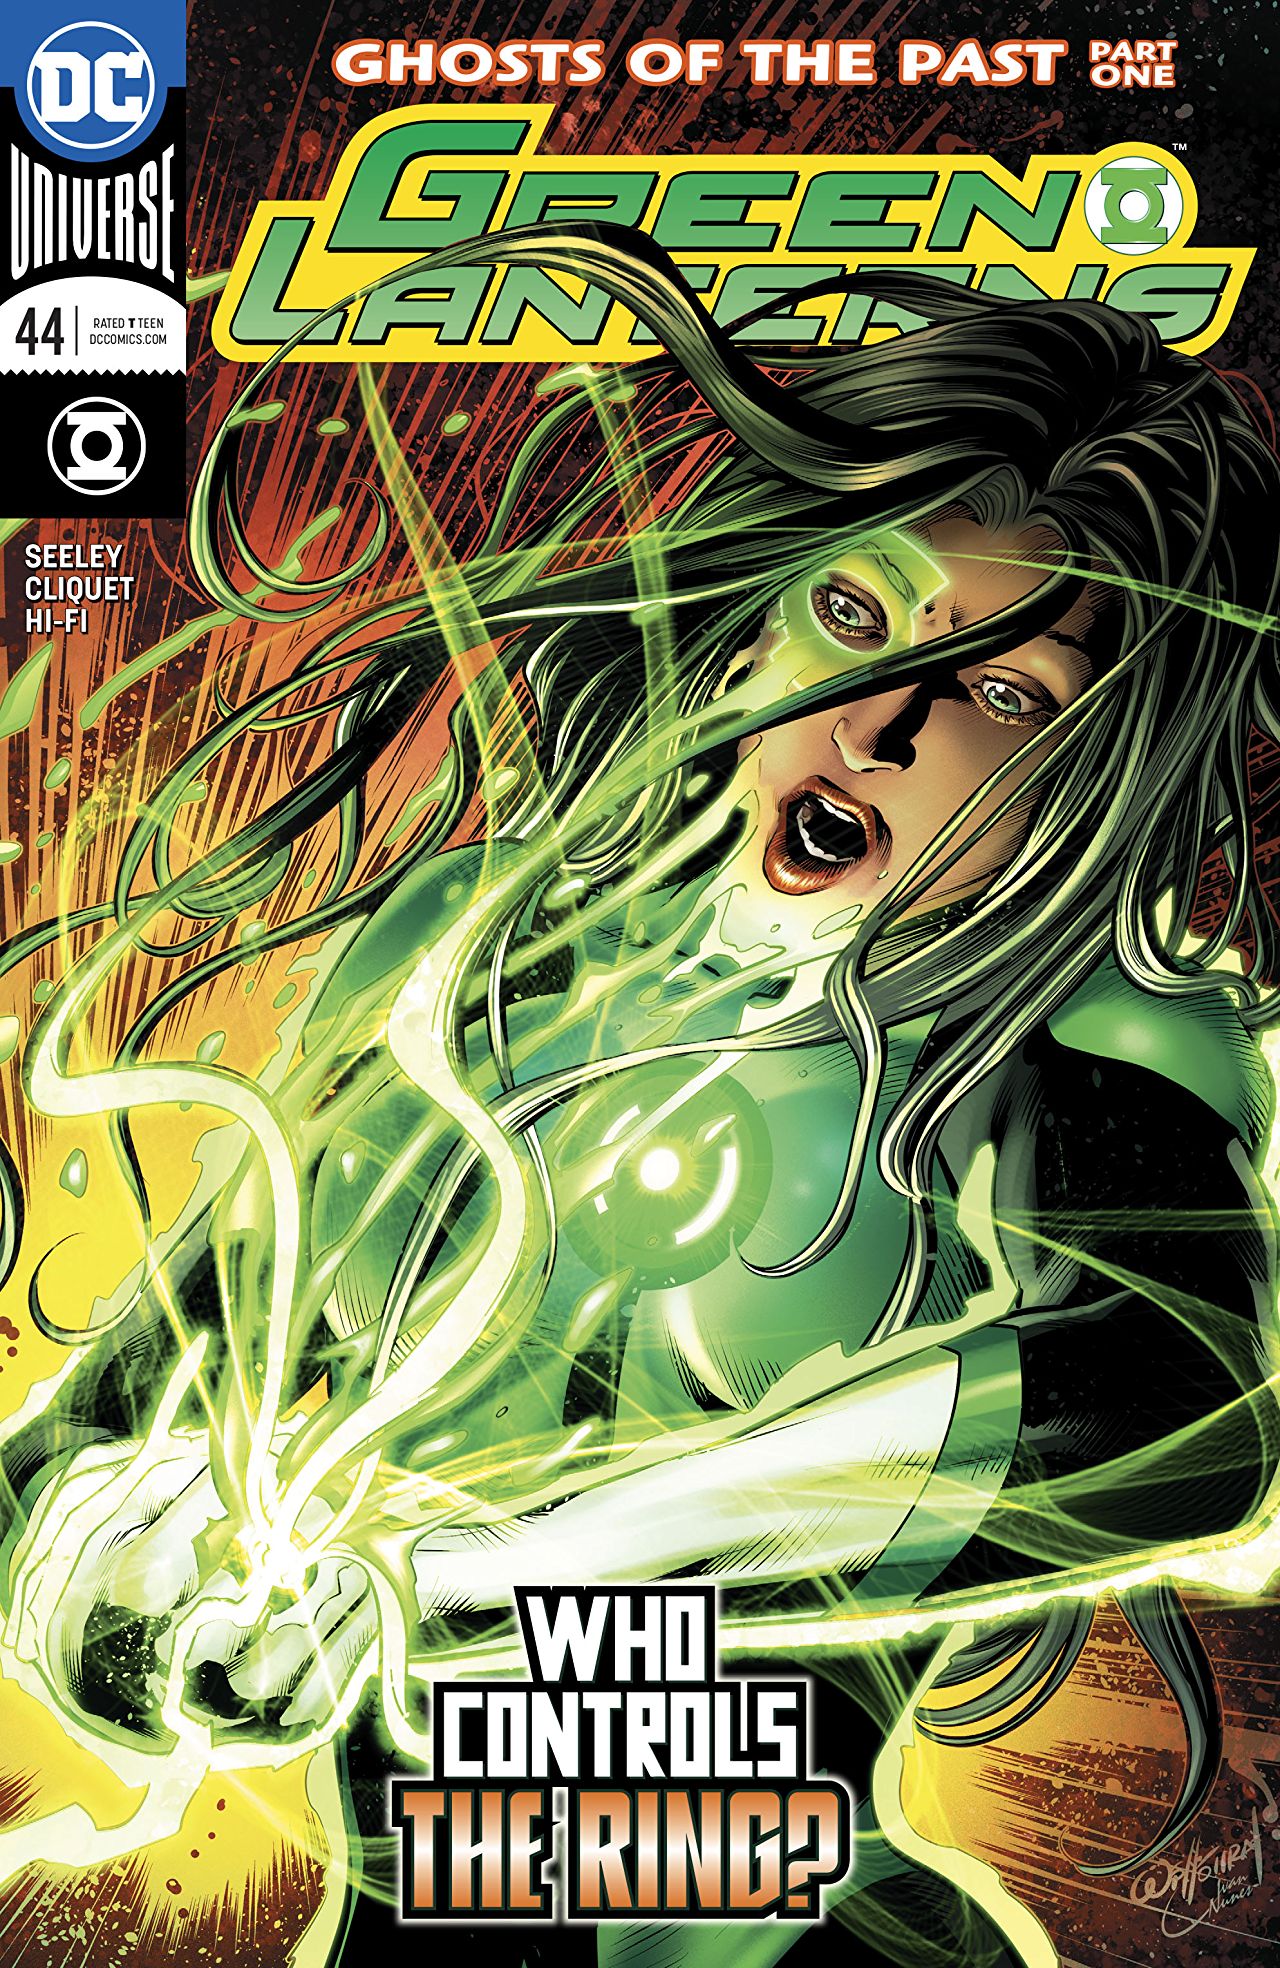 Green Lanterns #44 review: "Ghosts of the Past" could be the start of a character defining story